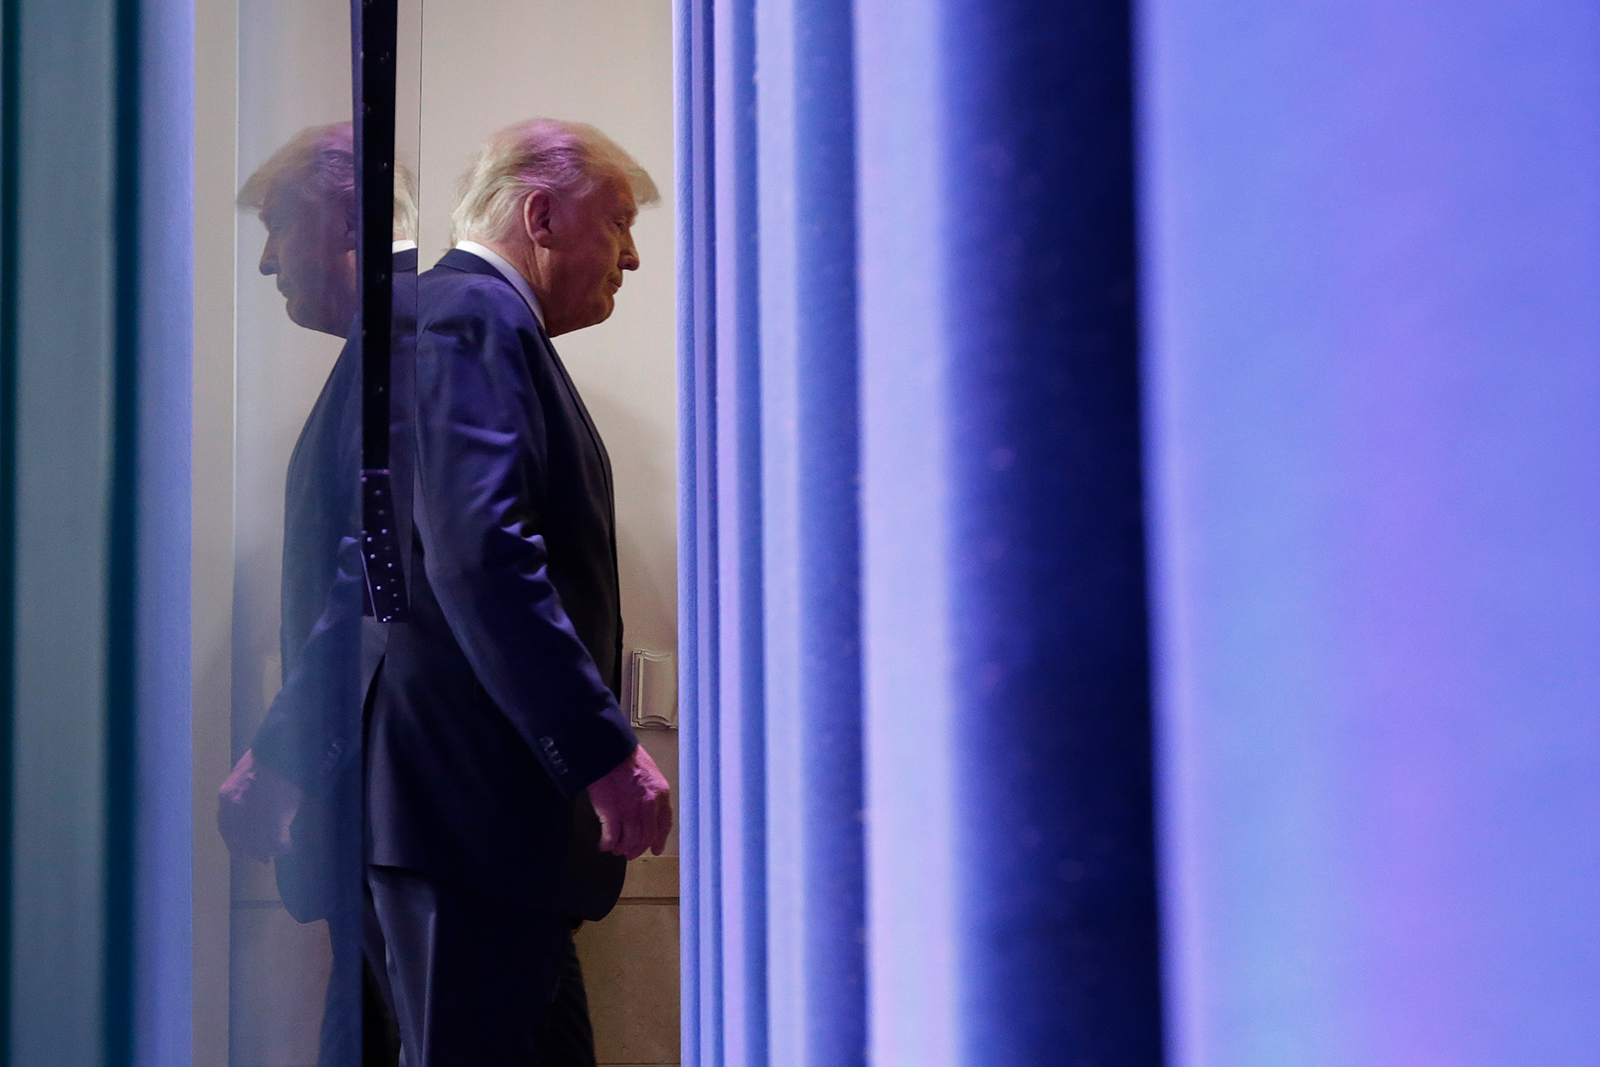 President Donald Trump leaves after speaking in the briefing room at the White House on November 5, in Washington, DC.